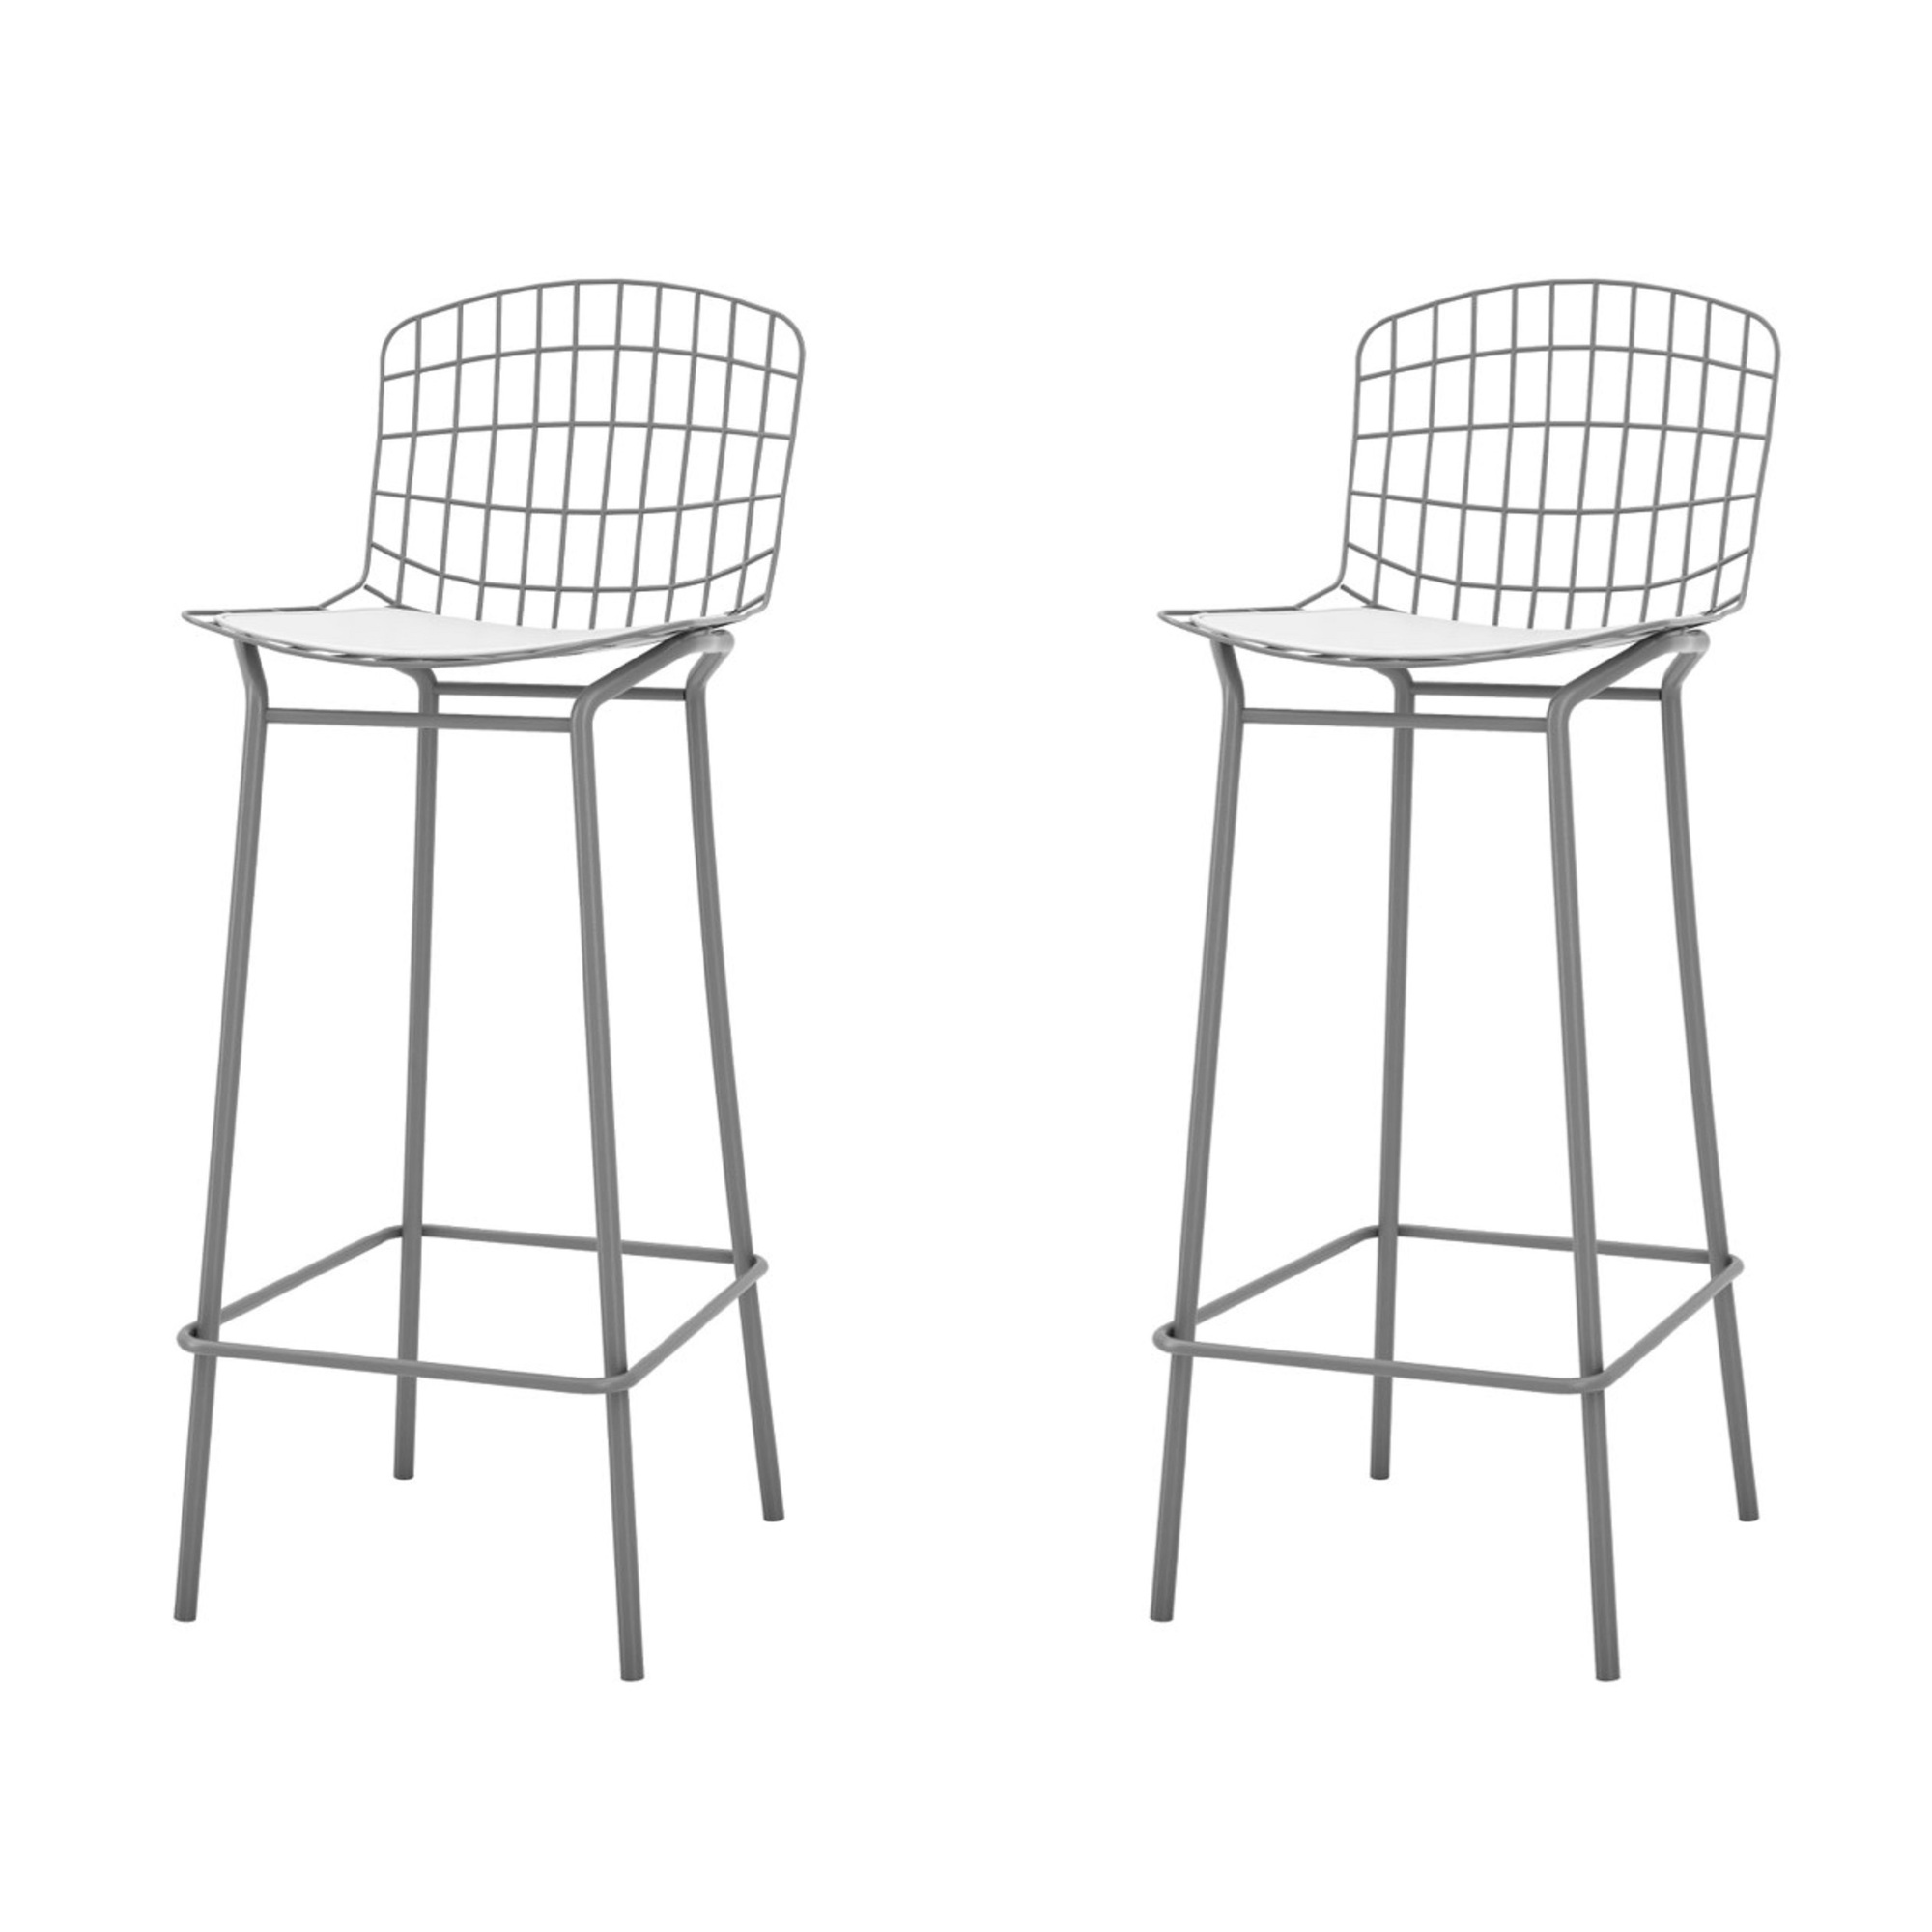 Manhattan Comfort, Madeline 41.73Inch Stool Set 2 Cushion Charcoal White, Primary Color White, Included (qty.) 2 Model 2-198AMC